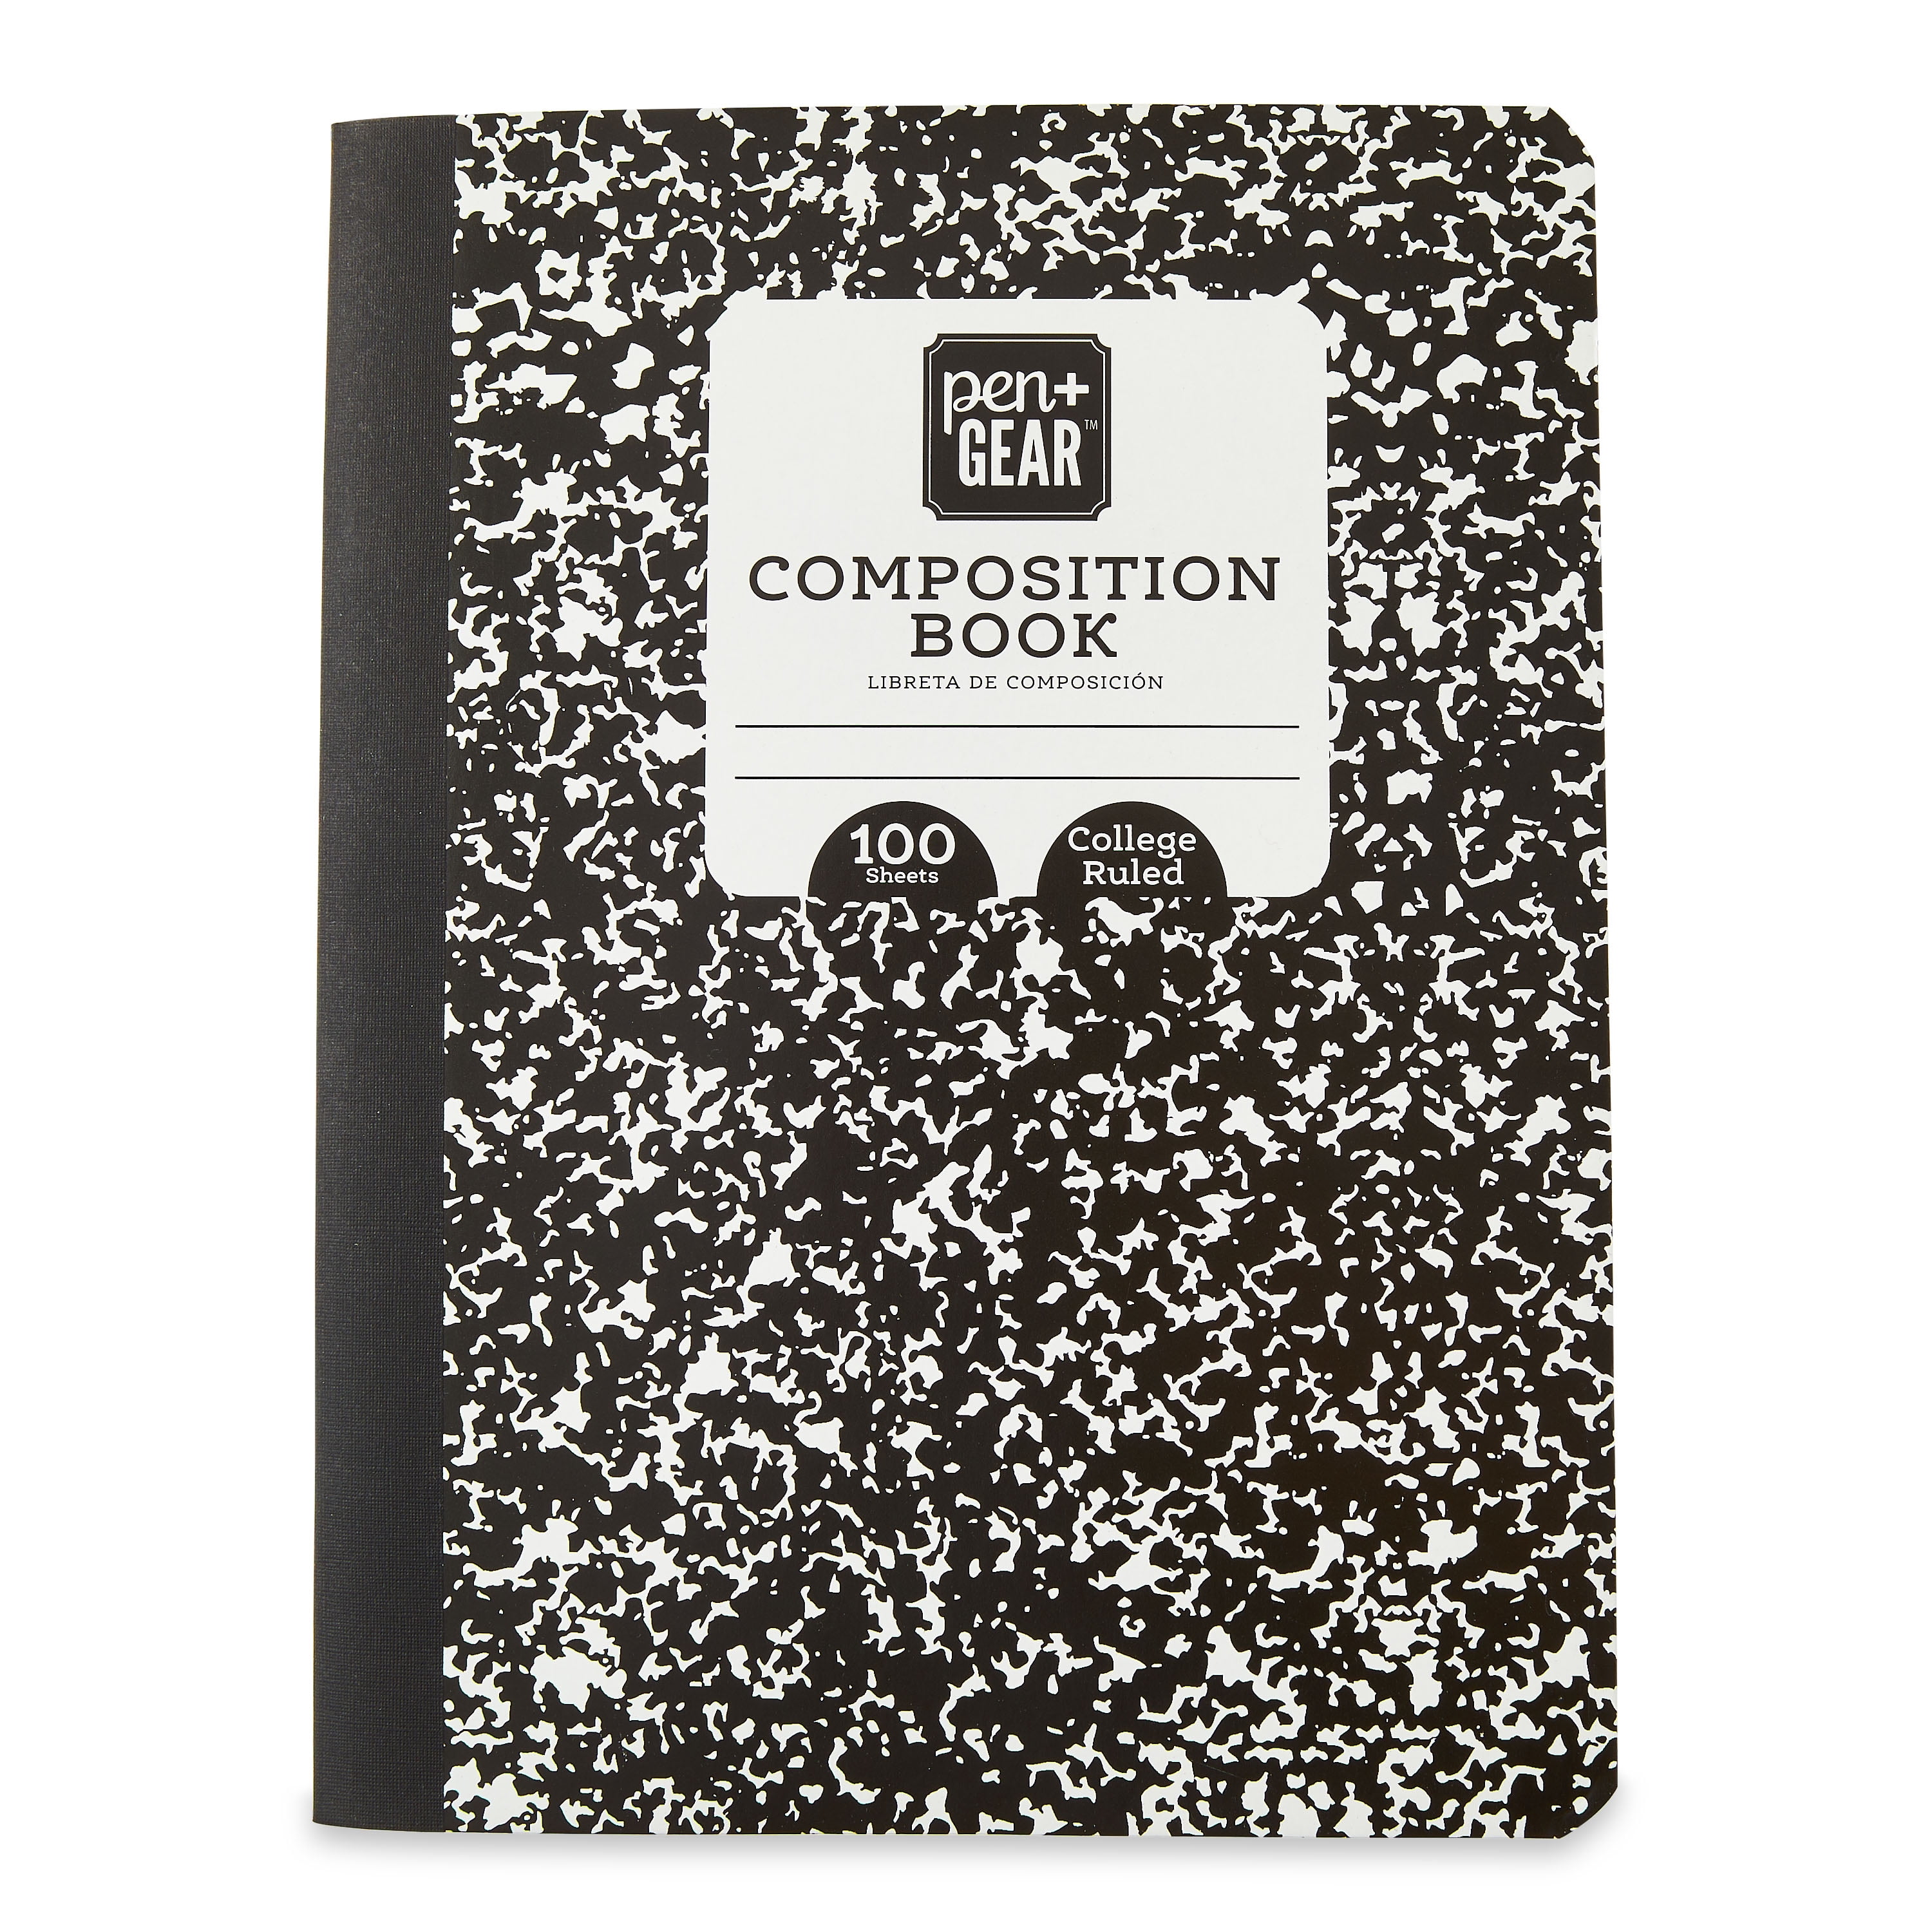 Pen+Gear College Ruled Composition Book, 7.5" x 9.5", Black & White, 100 Sheets